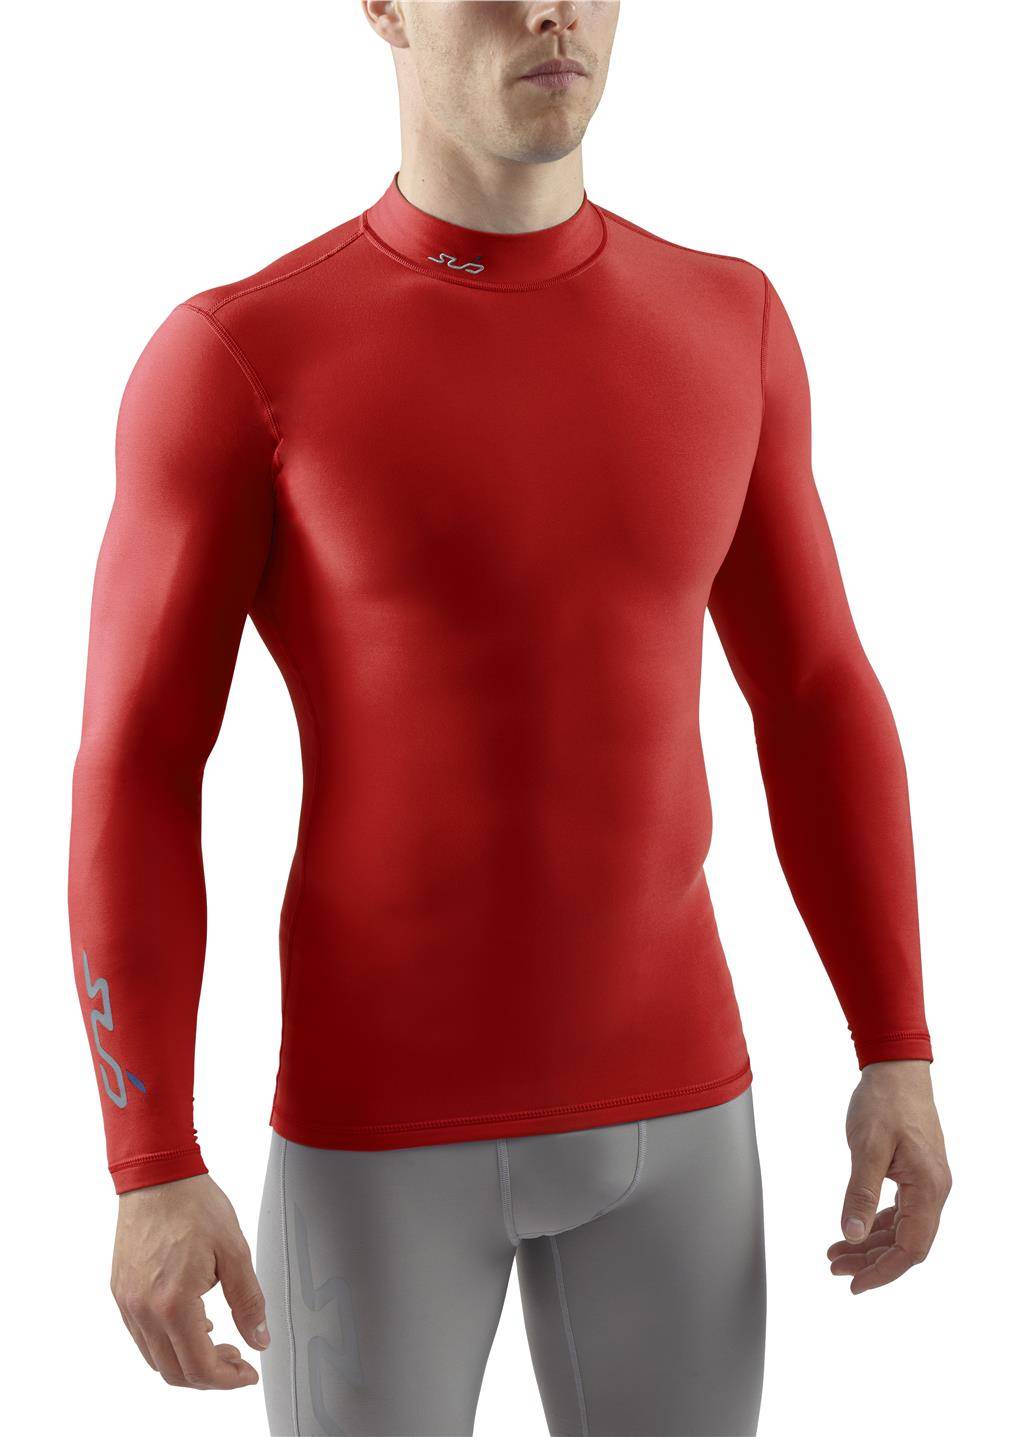 RBX Performance Baselayer Termal Top large. Men's Tactical Military Base layer Thermal Compression shorts. Колд мен